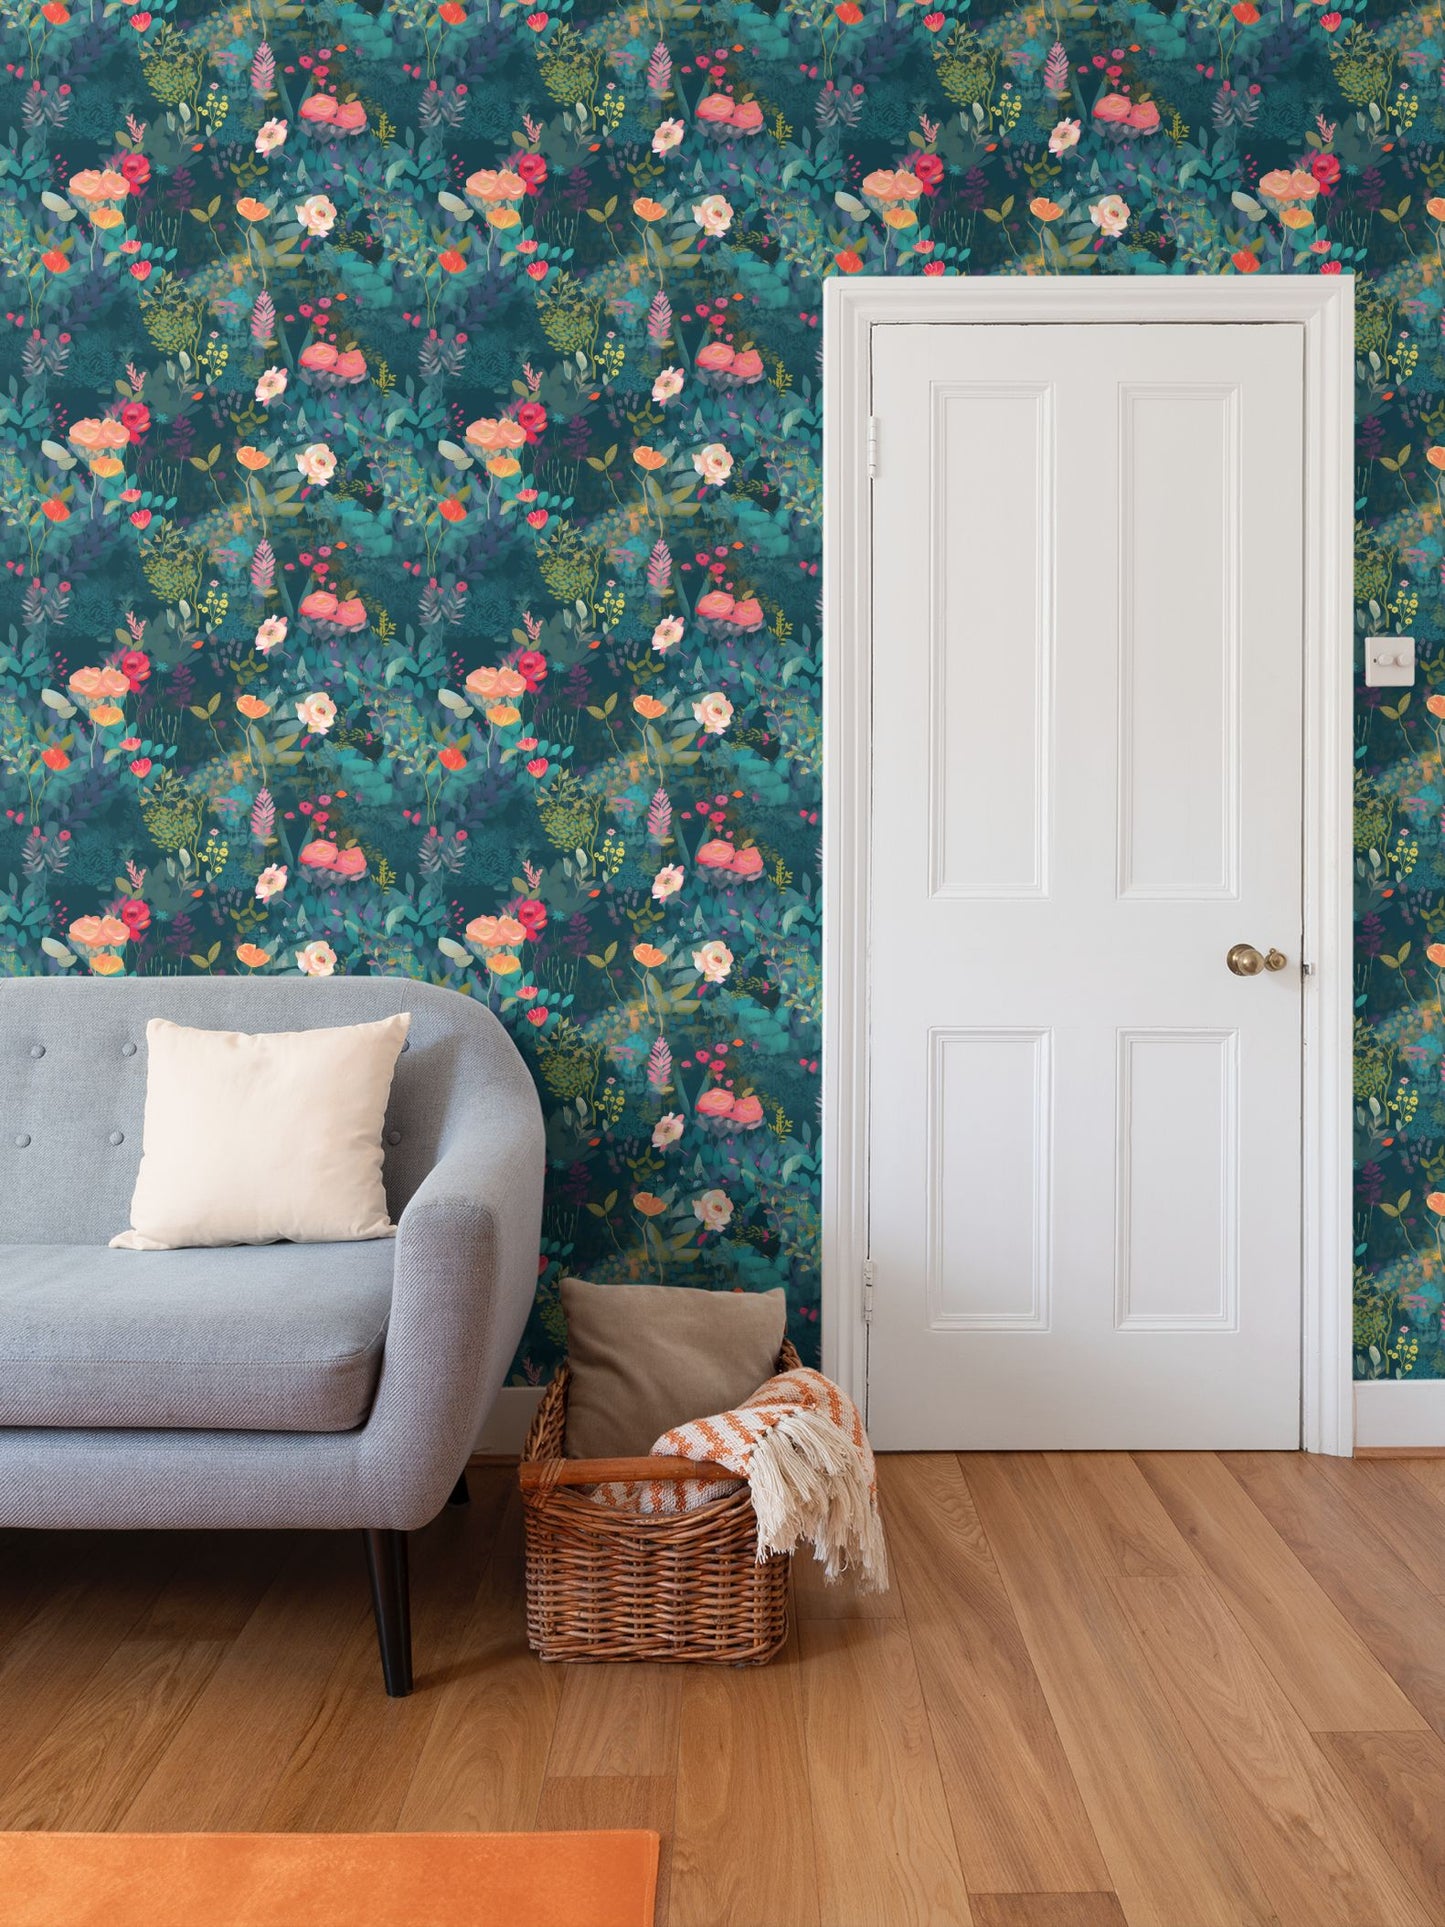 Teal Garden Whimsy Repeat Pattern Wallpaper